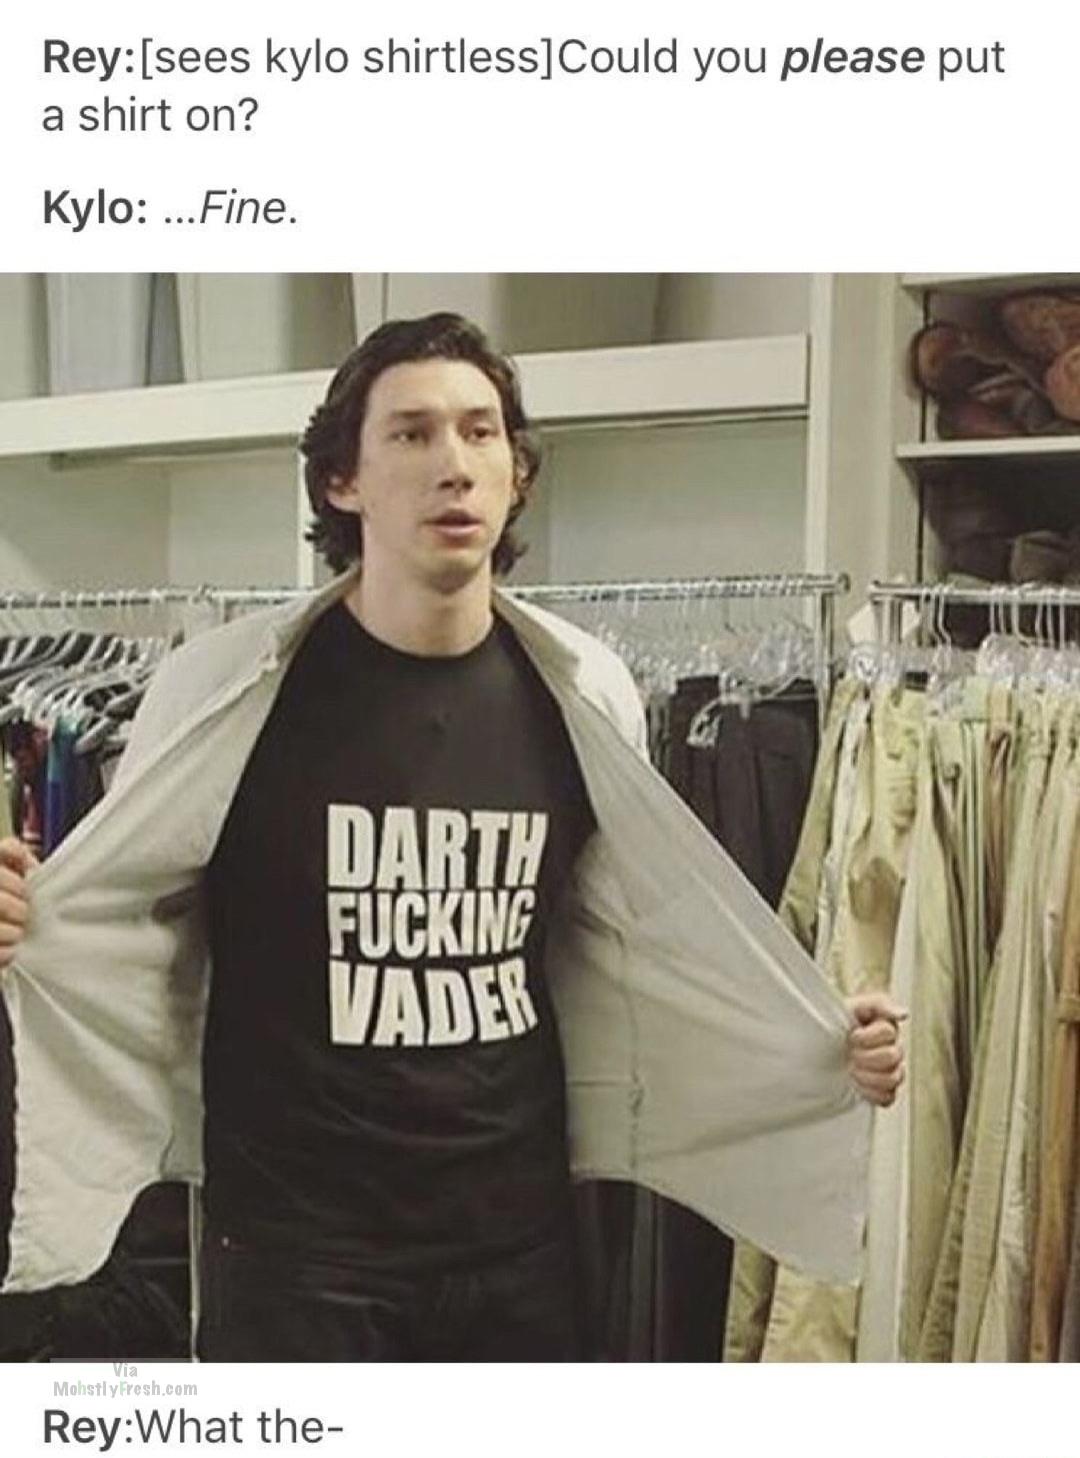 star wars t shirt - Reysees kylo shirtlessCould you please put a shirt on? Kylo ...Fine. Darth Fucking Vader MohstlyFresh.com ReyWhat the